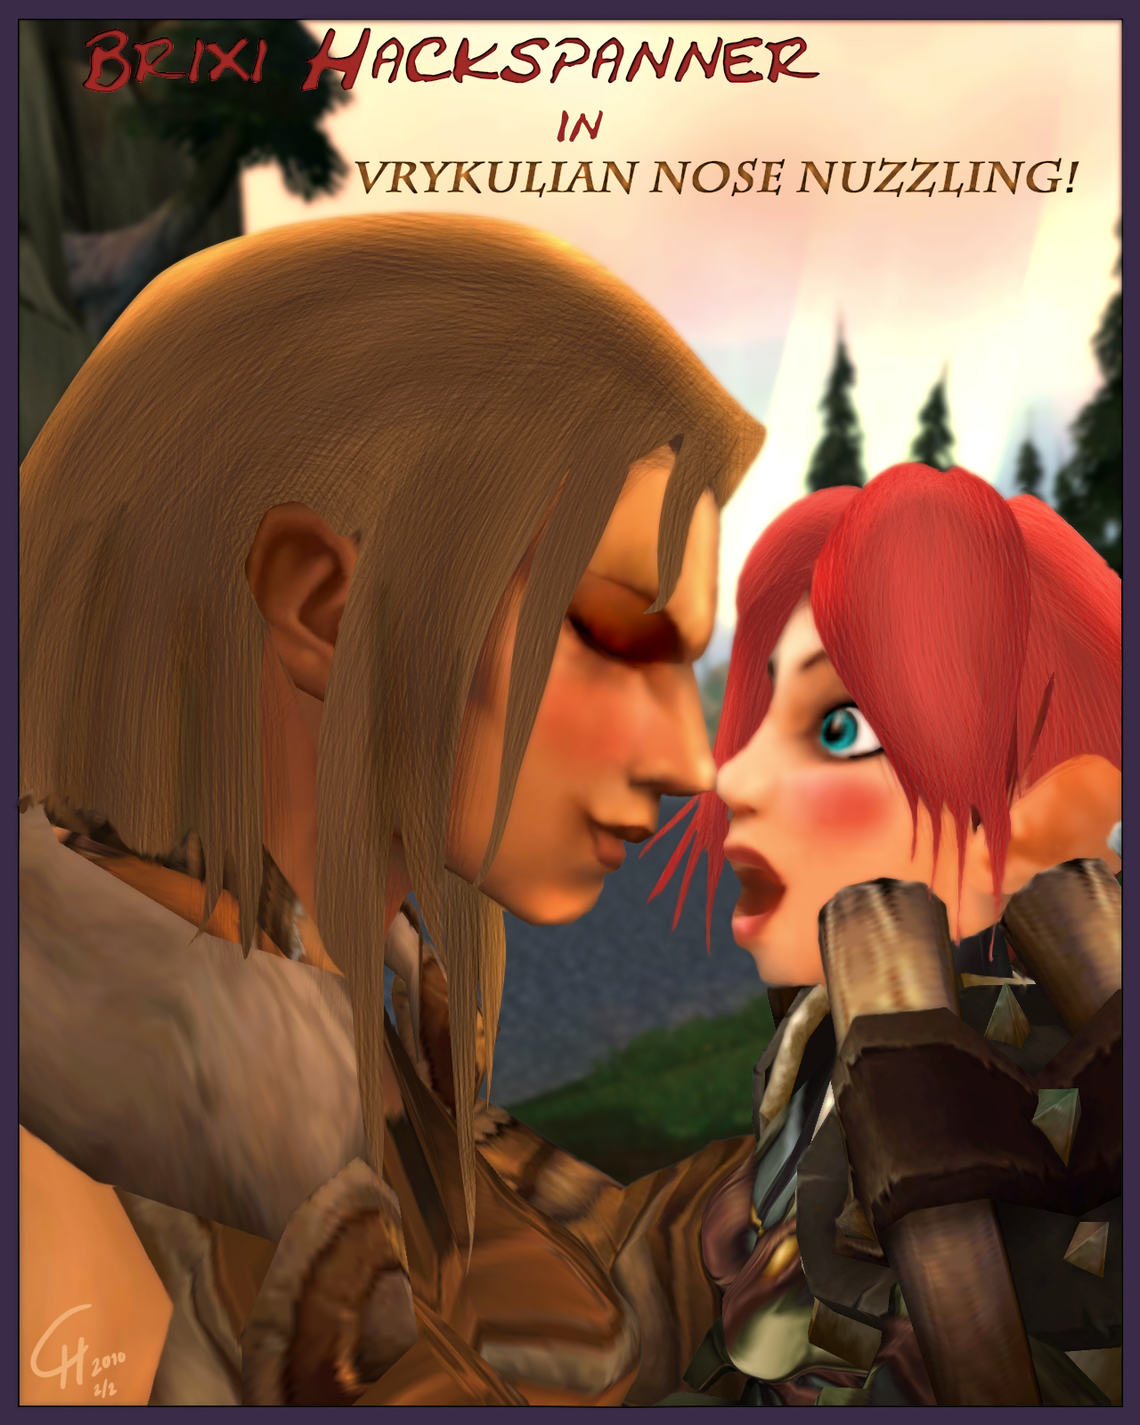 Brixi in Vrykulian Nose Nuzzling! (2/2) [Gnome/SFW/Comic]
A silly short comic I made by request, 2010.
Keywords: Gnome;OC;Comic;SFW;Size difference